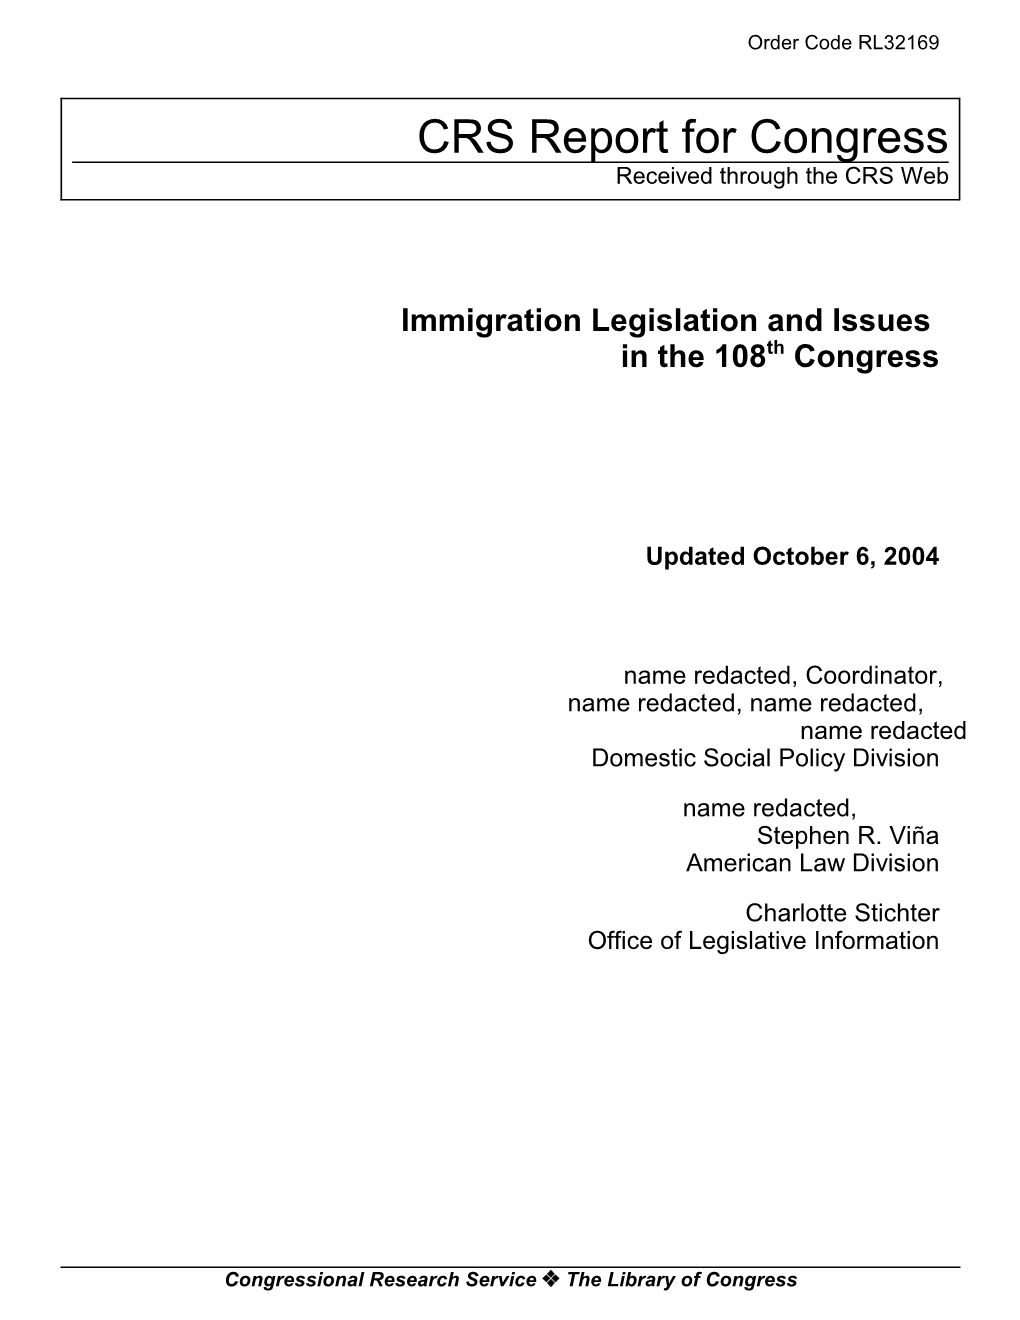 Immigration Legislation and Issues in the 108Th Congress